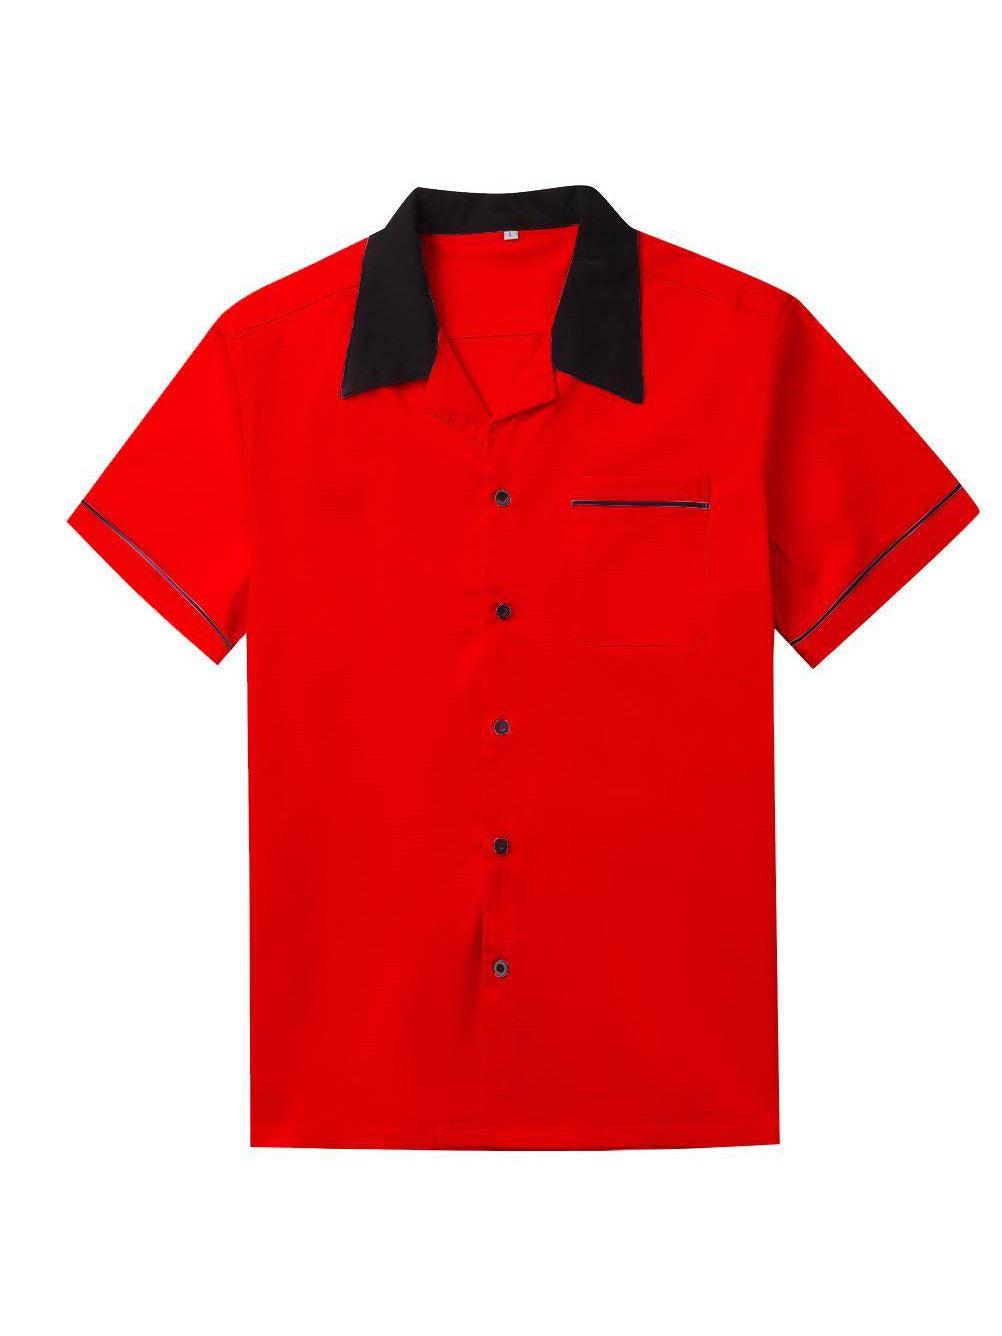 Mens Vintage Style Bowling Dress Shirt - RED